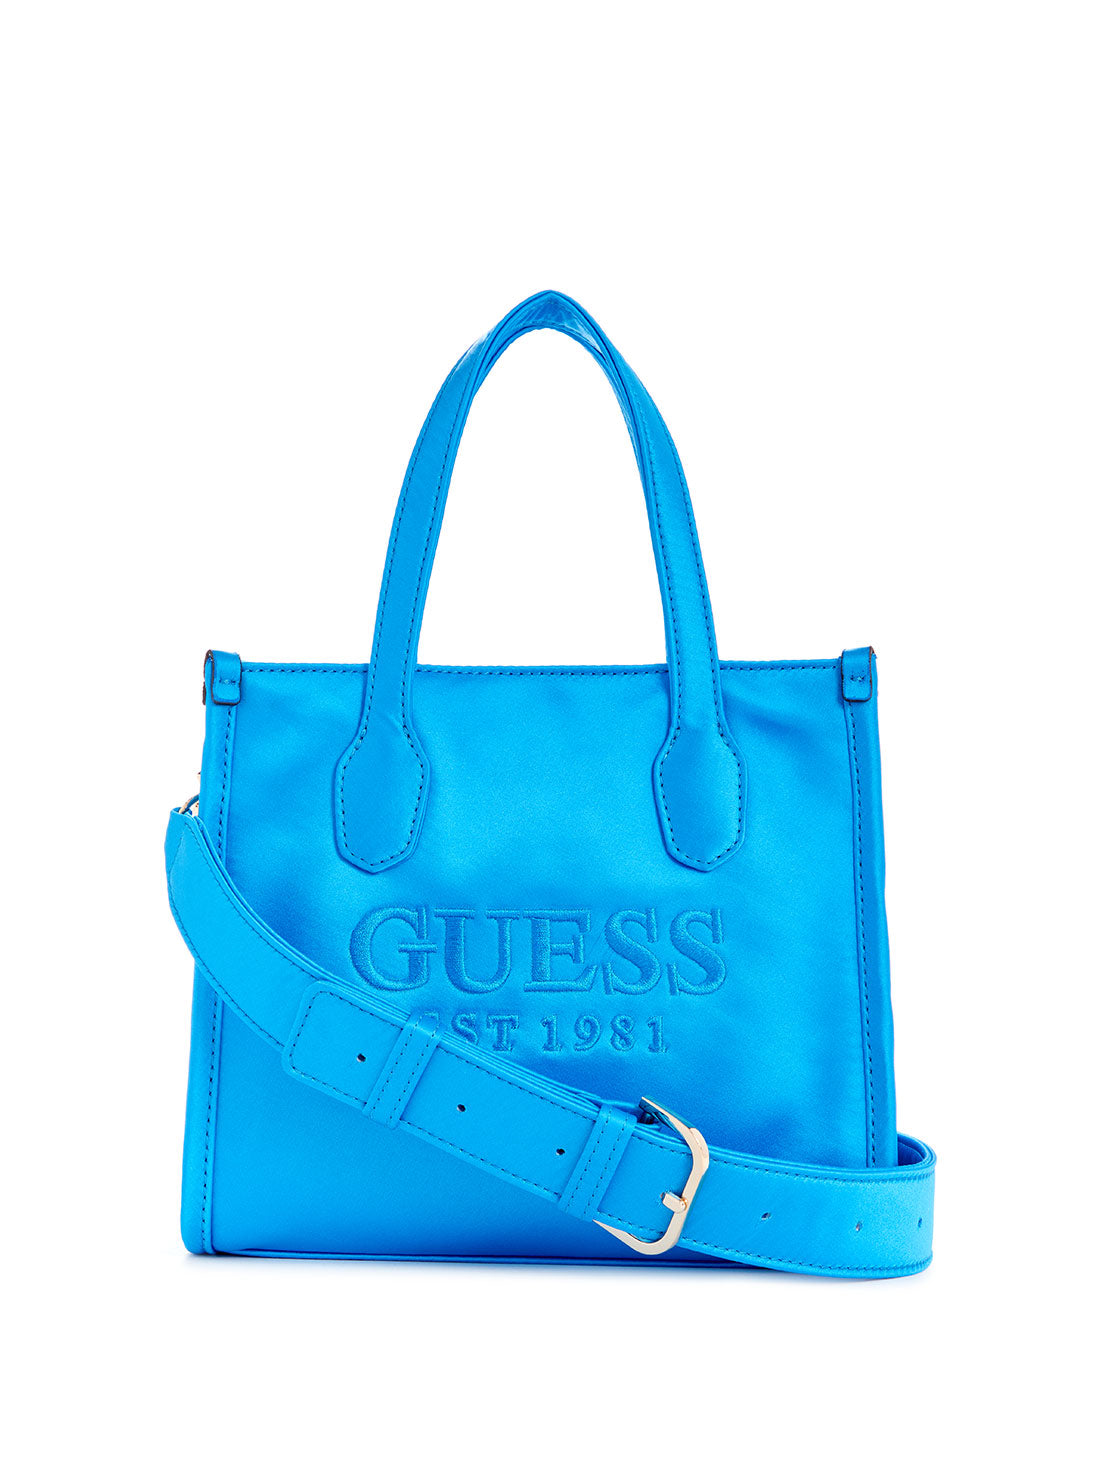 GUESS Blue Silvana Mini Tote Bag front view